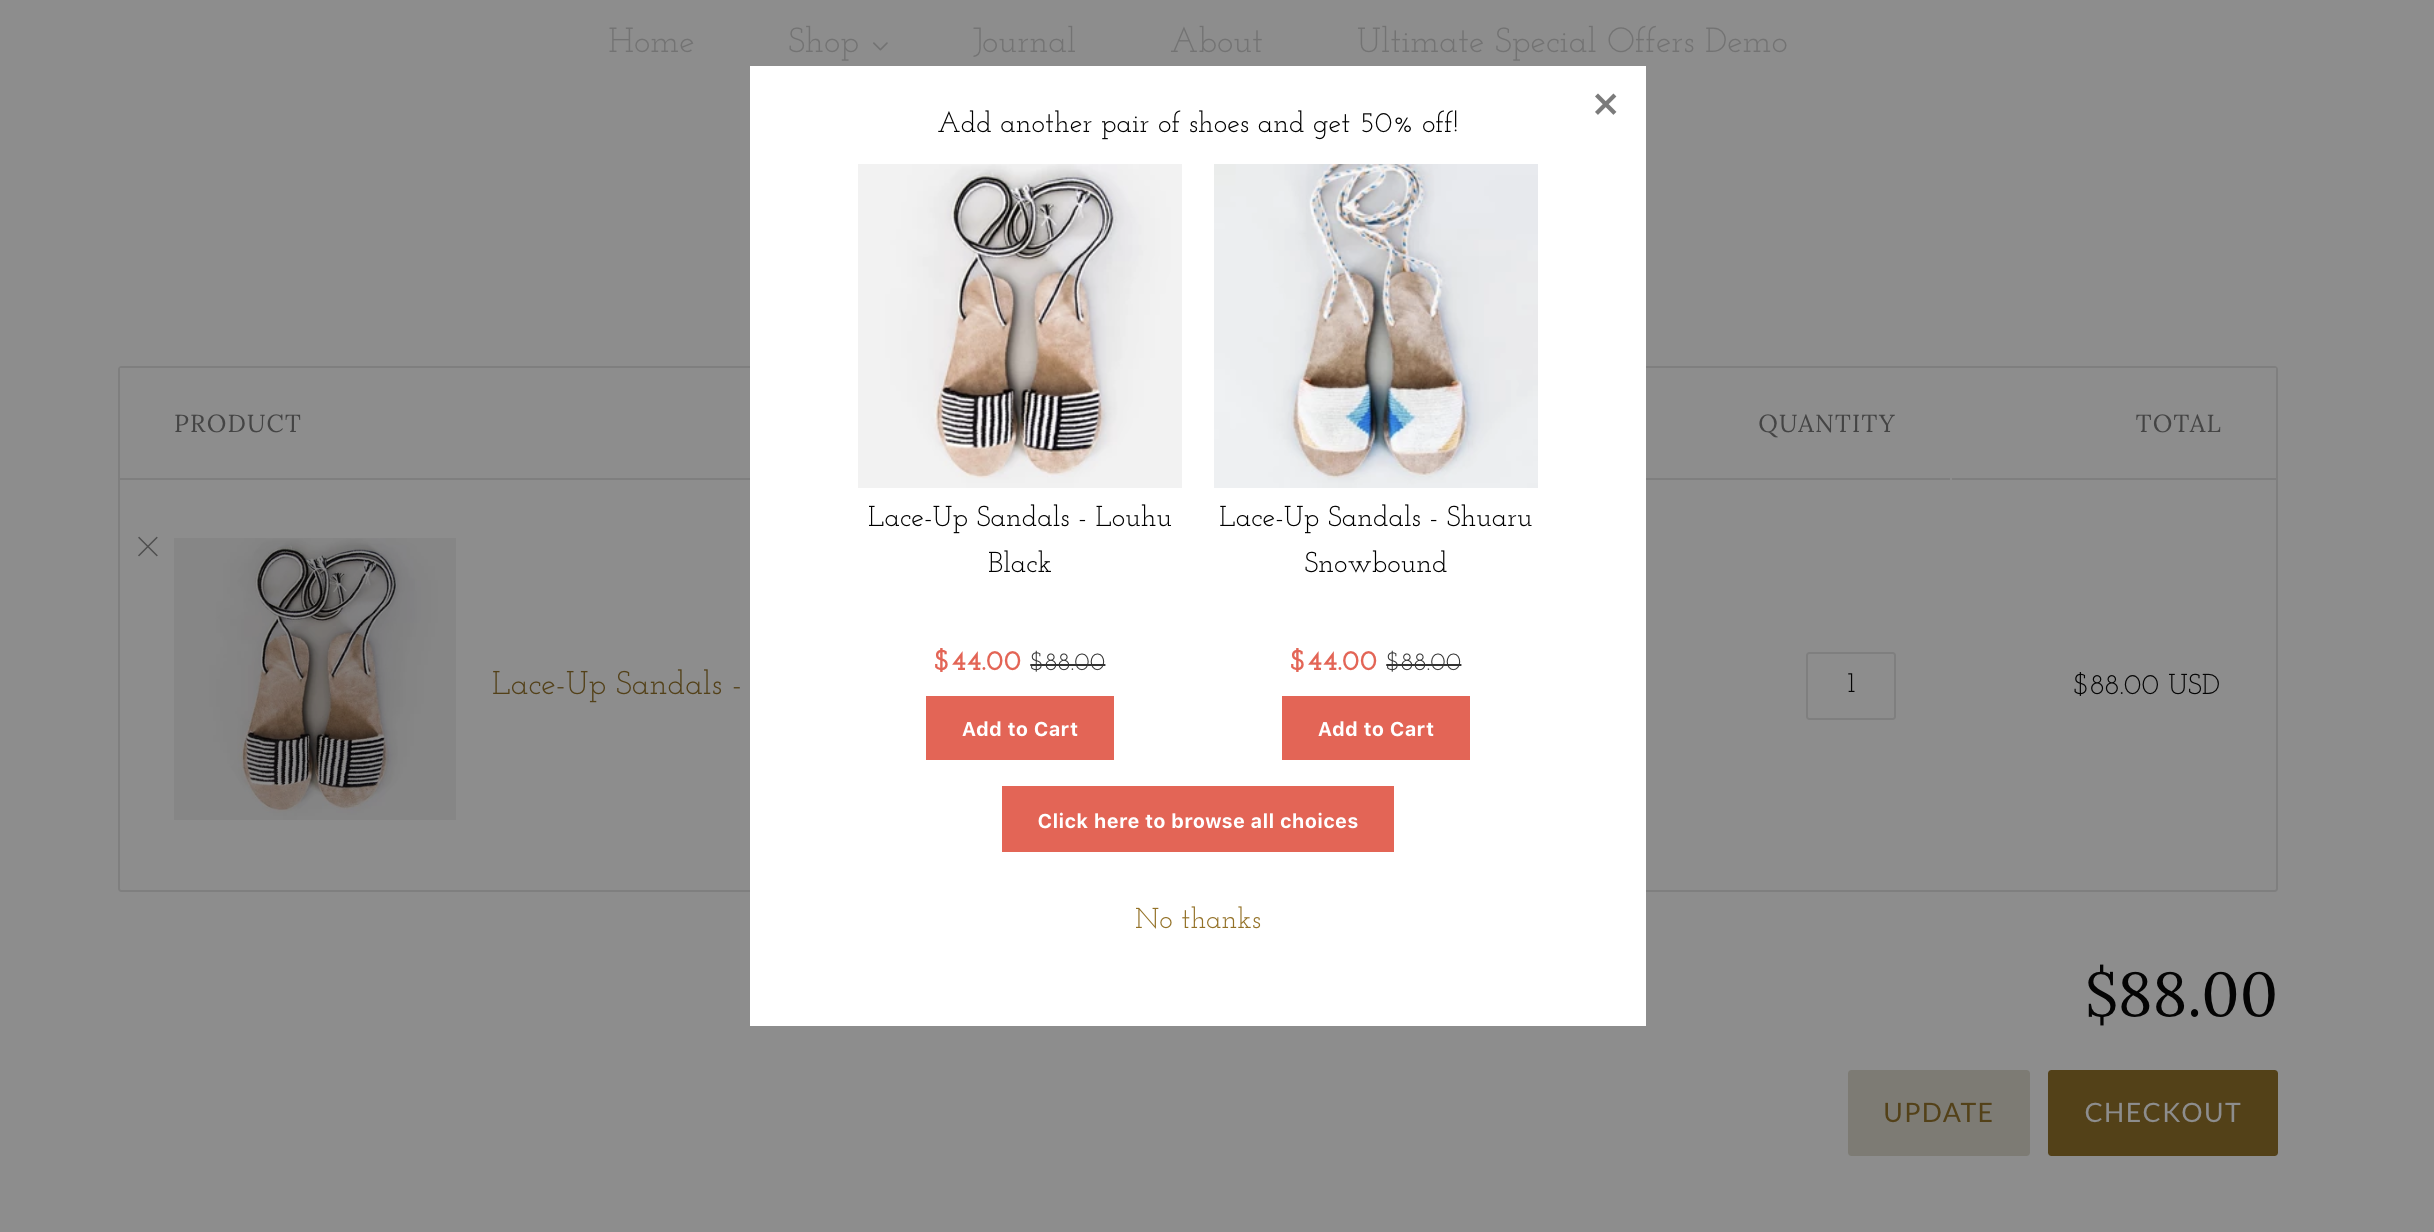 A BOGO popup on the cart page allowing customers to add another pair of shoes to the cart for a discounted price.